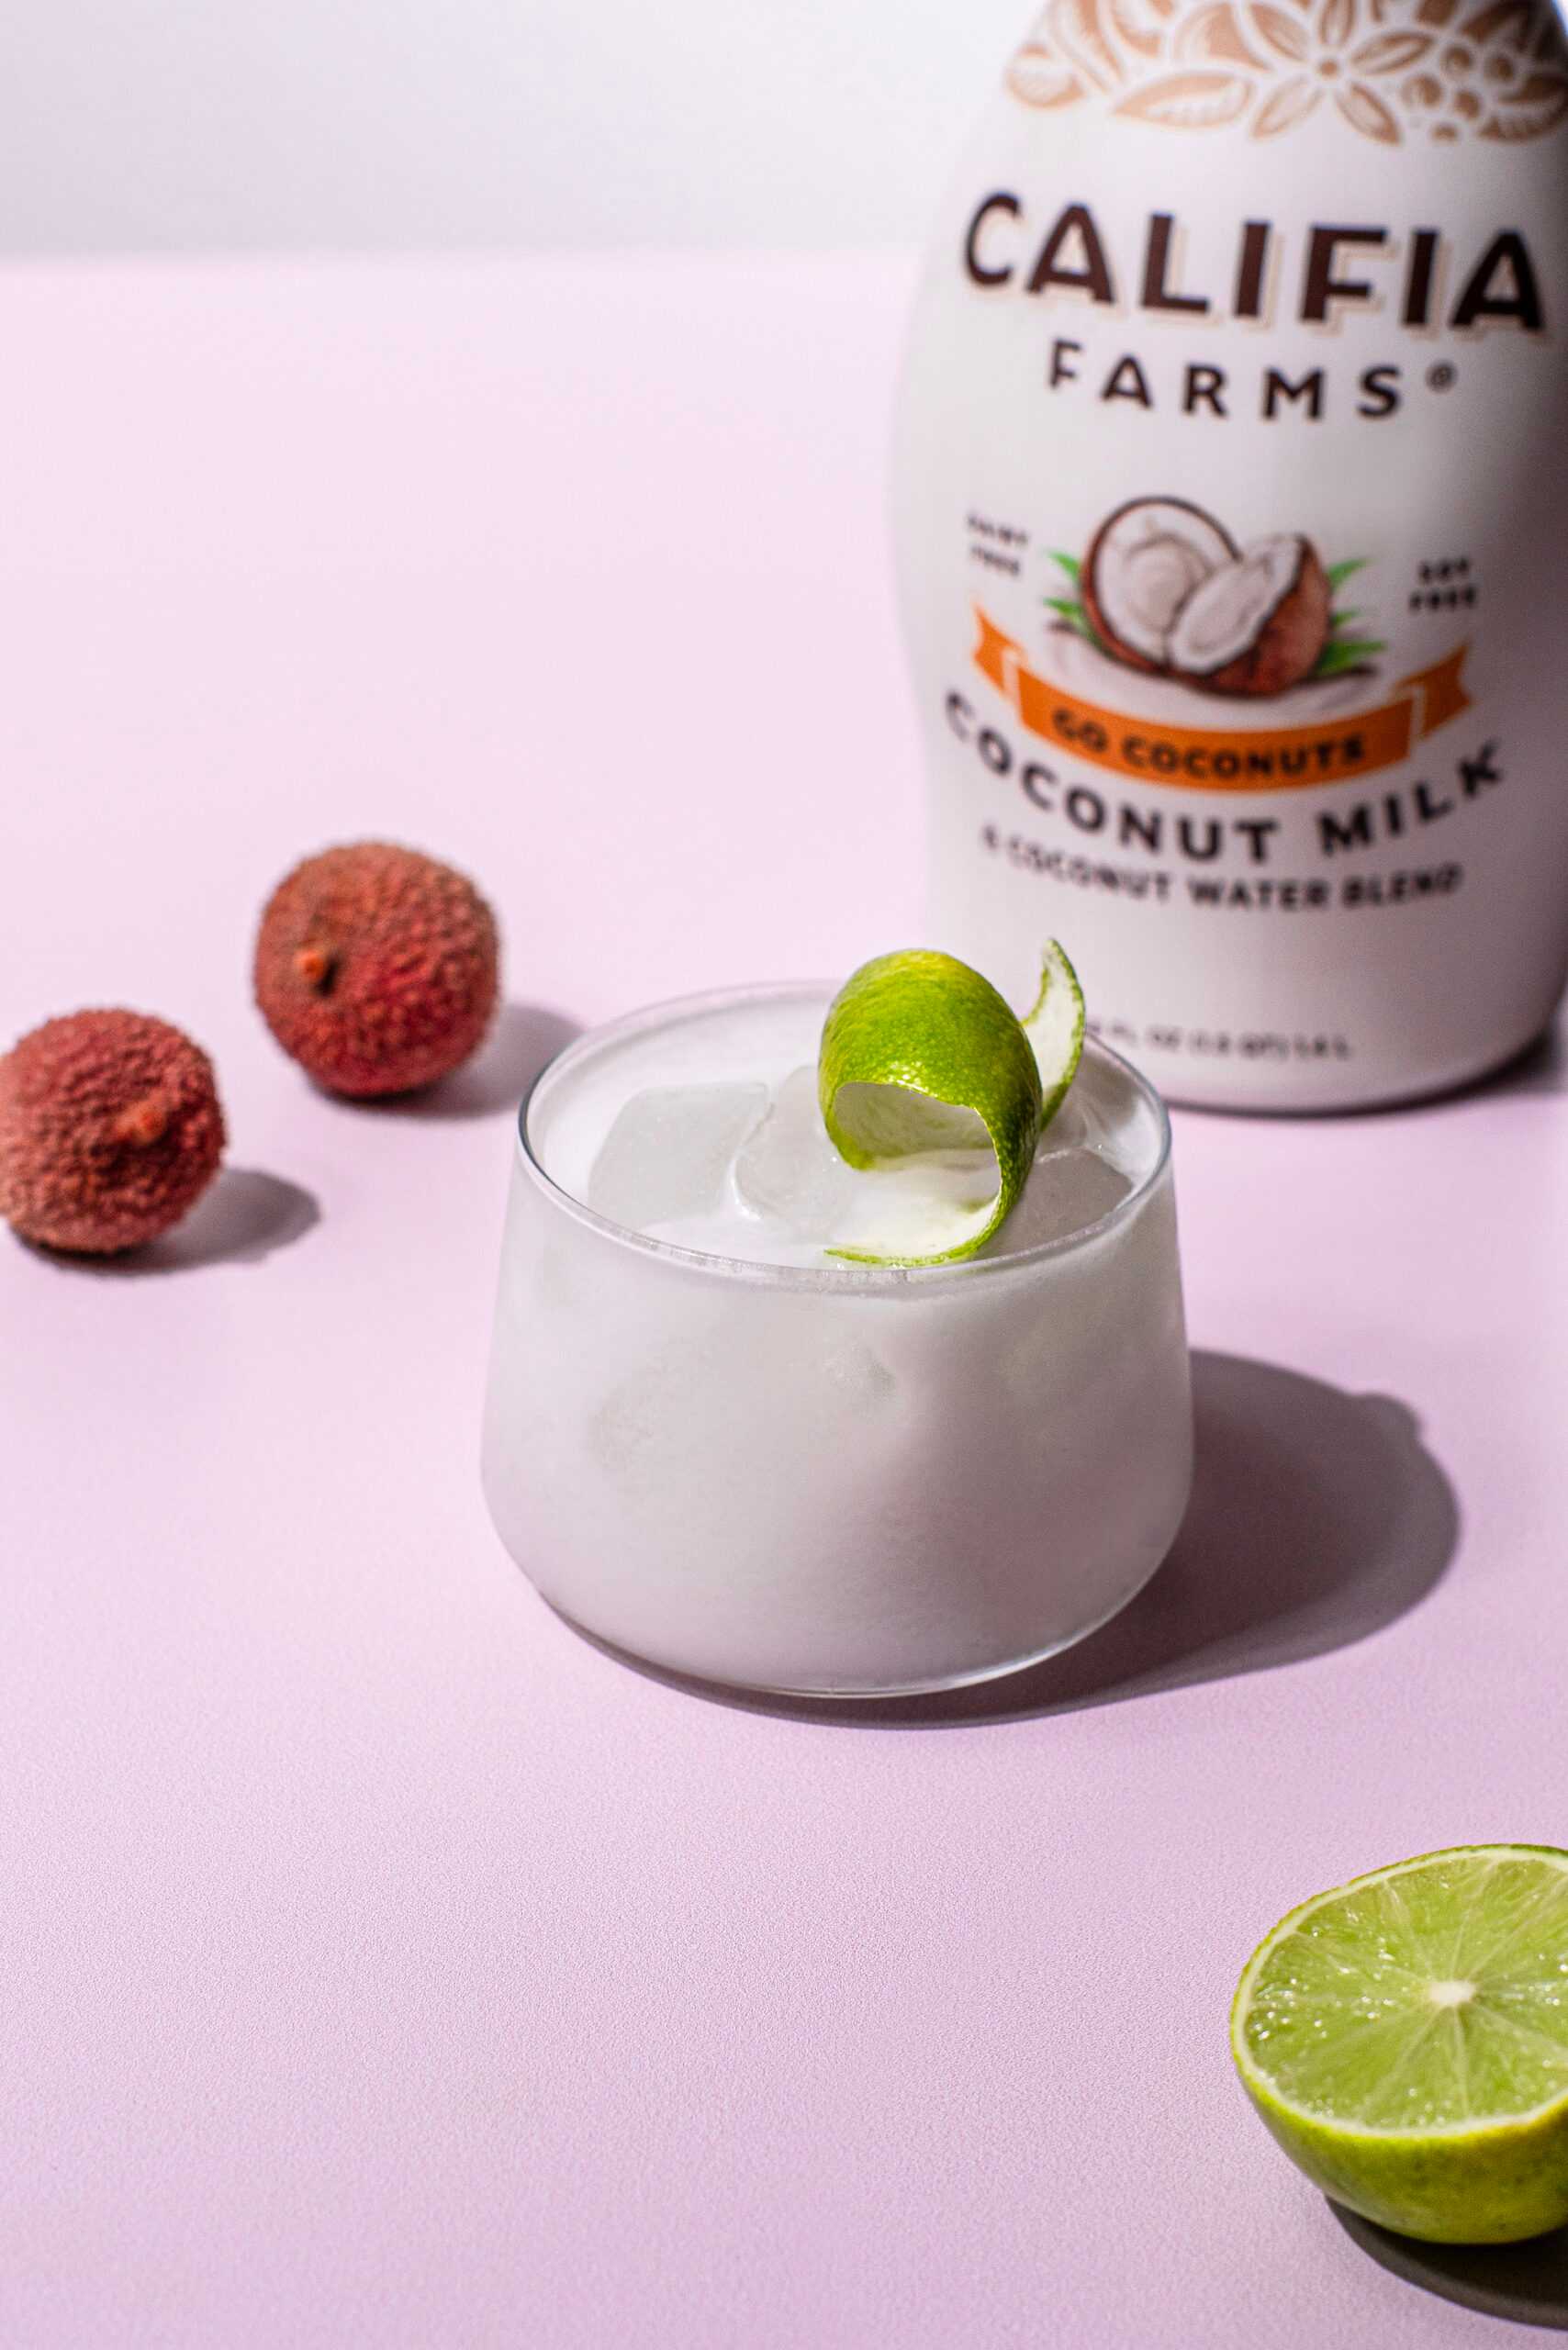 Coconut lychee cocktail garnished with a lime wedge sits in the center of the image, with lychee fruit off to the side and Califia Farms Go Coconuts Coconutmilk in the background.